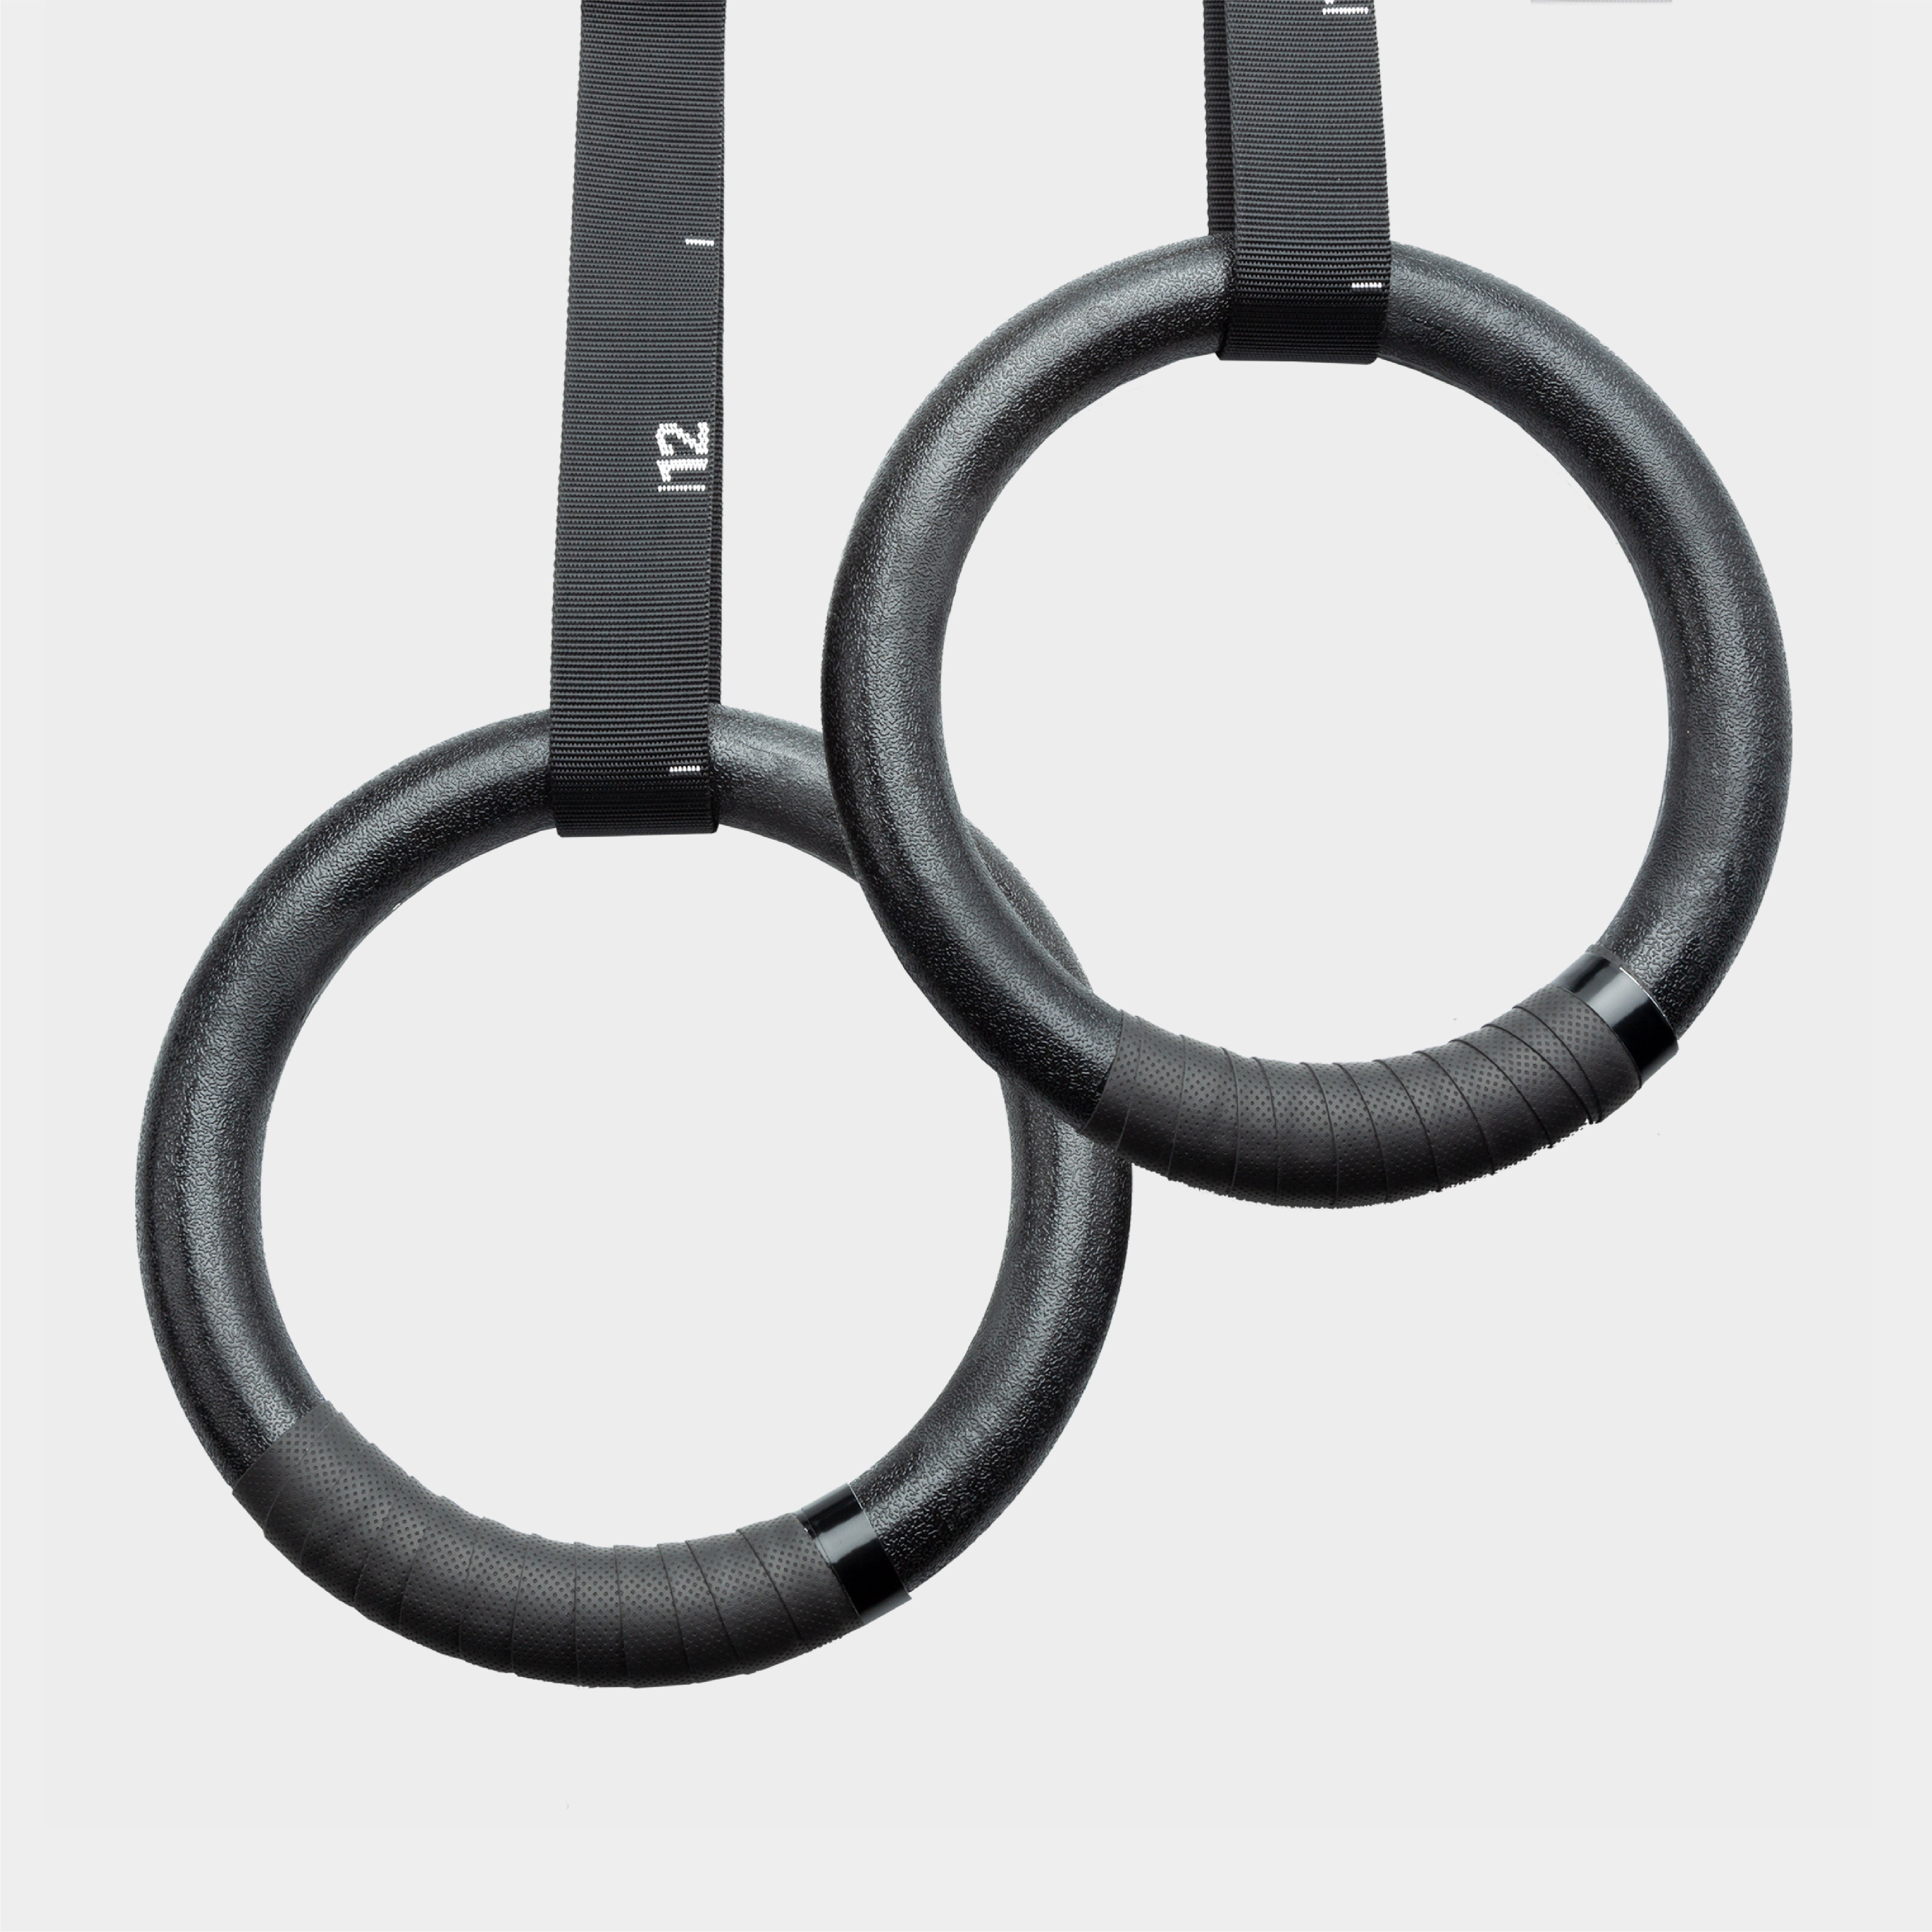 ZEUZ ABS Gymnastic Rings for Fitness, CrossFit & Calisthenics